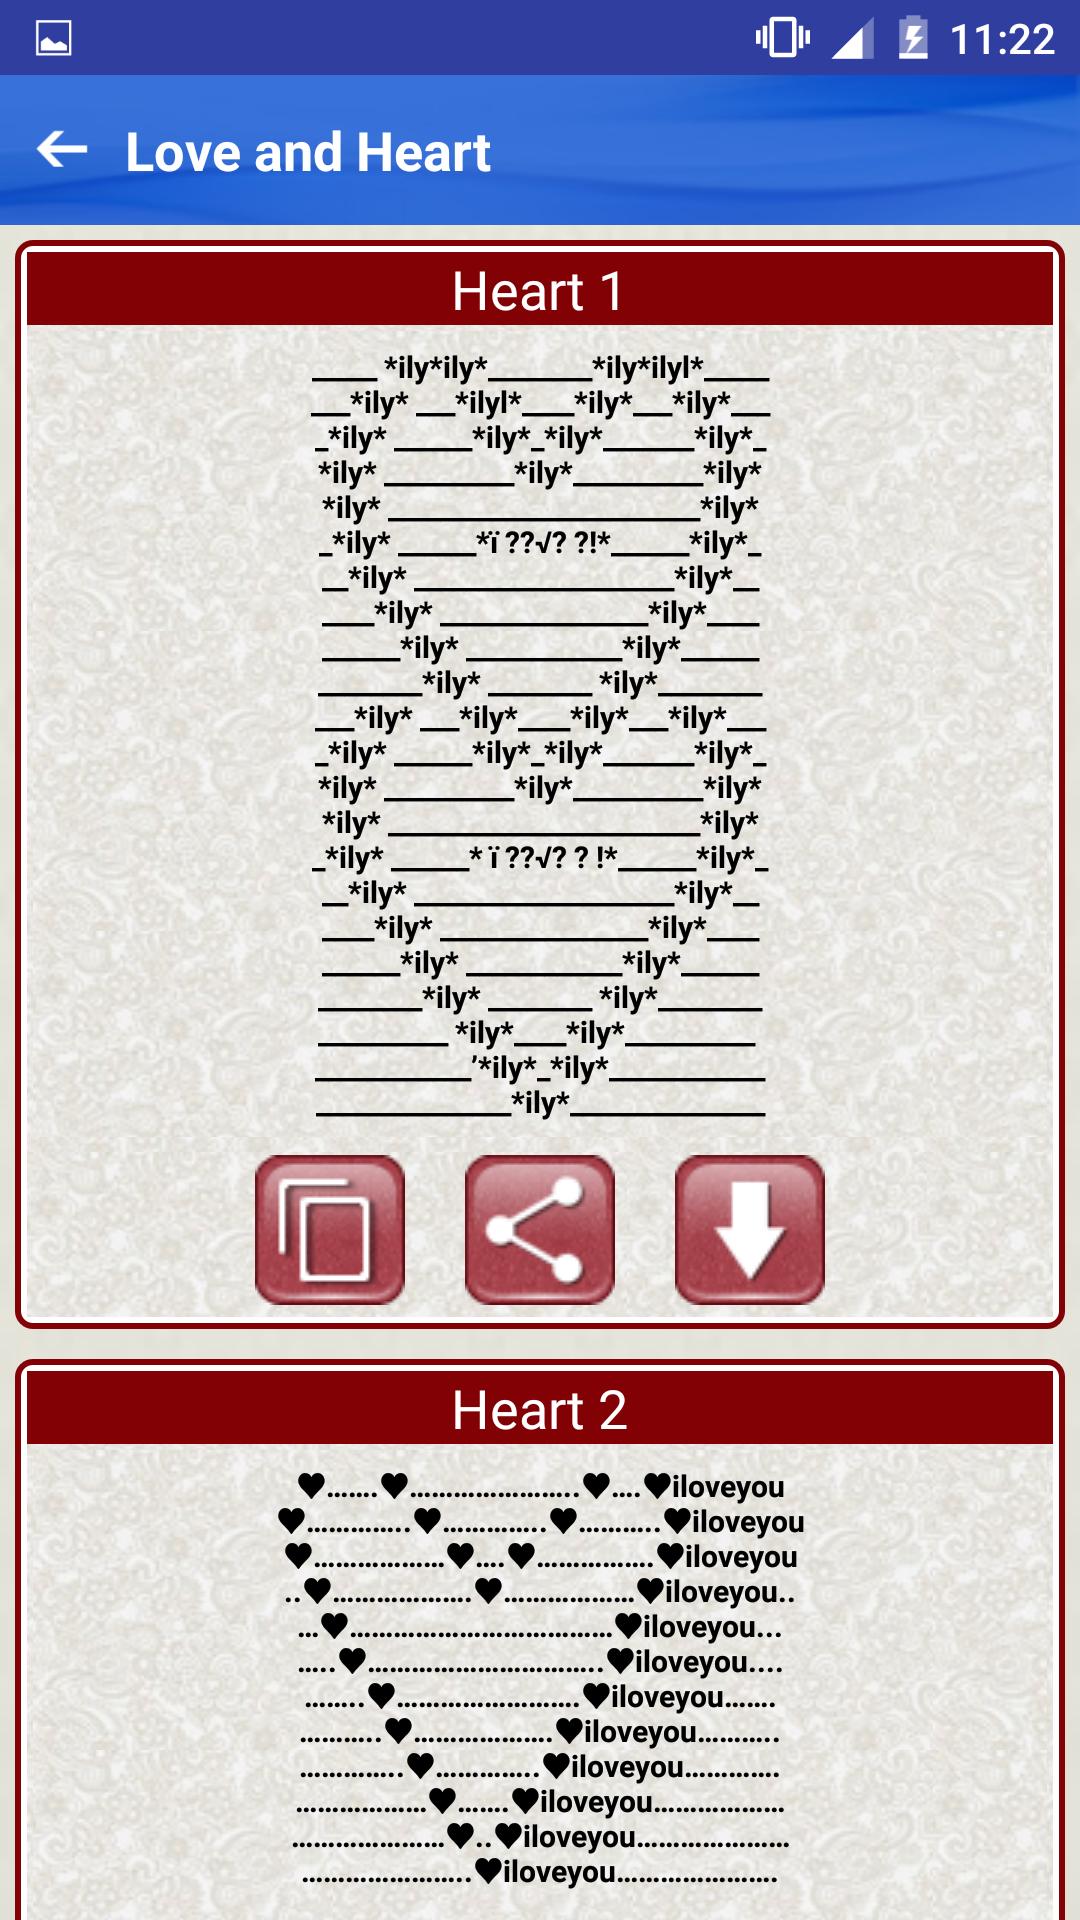 Word Arts Ascii Text Art Pictures Symbols Images Para Android